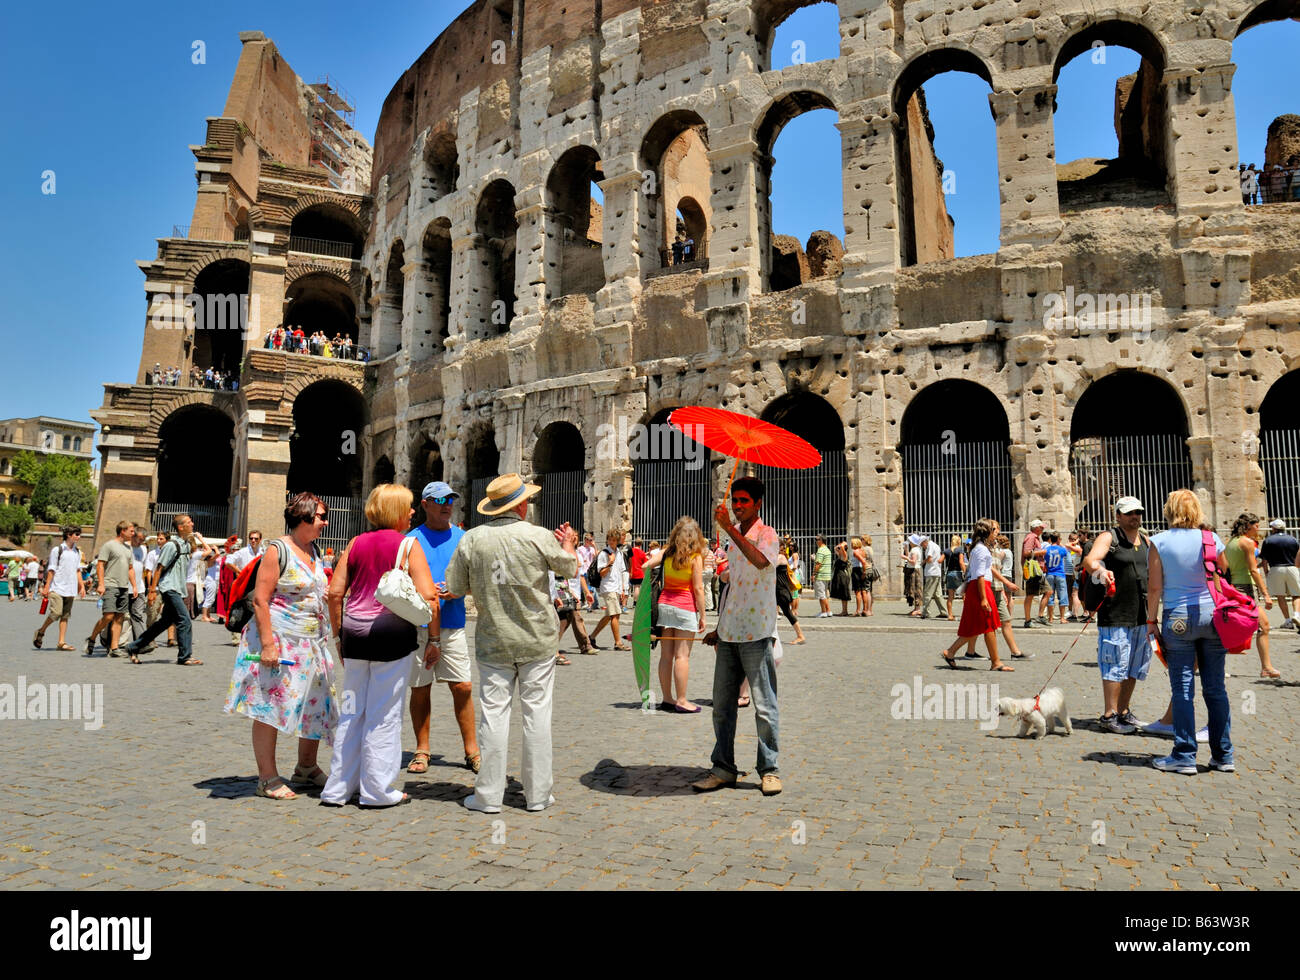 Immigrant sell sun umbrellas in the street to tourists by the Colosseum, Rome, Lazio, Italy, Europe. Stock Photo